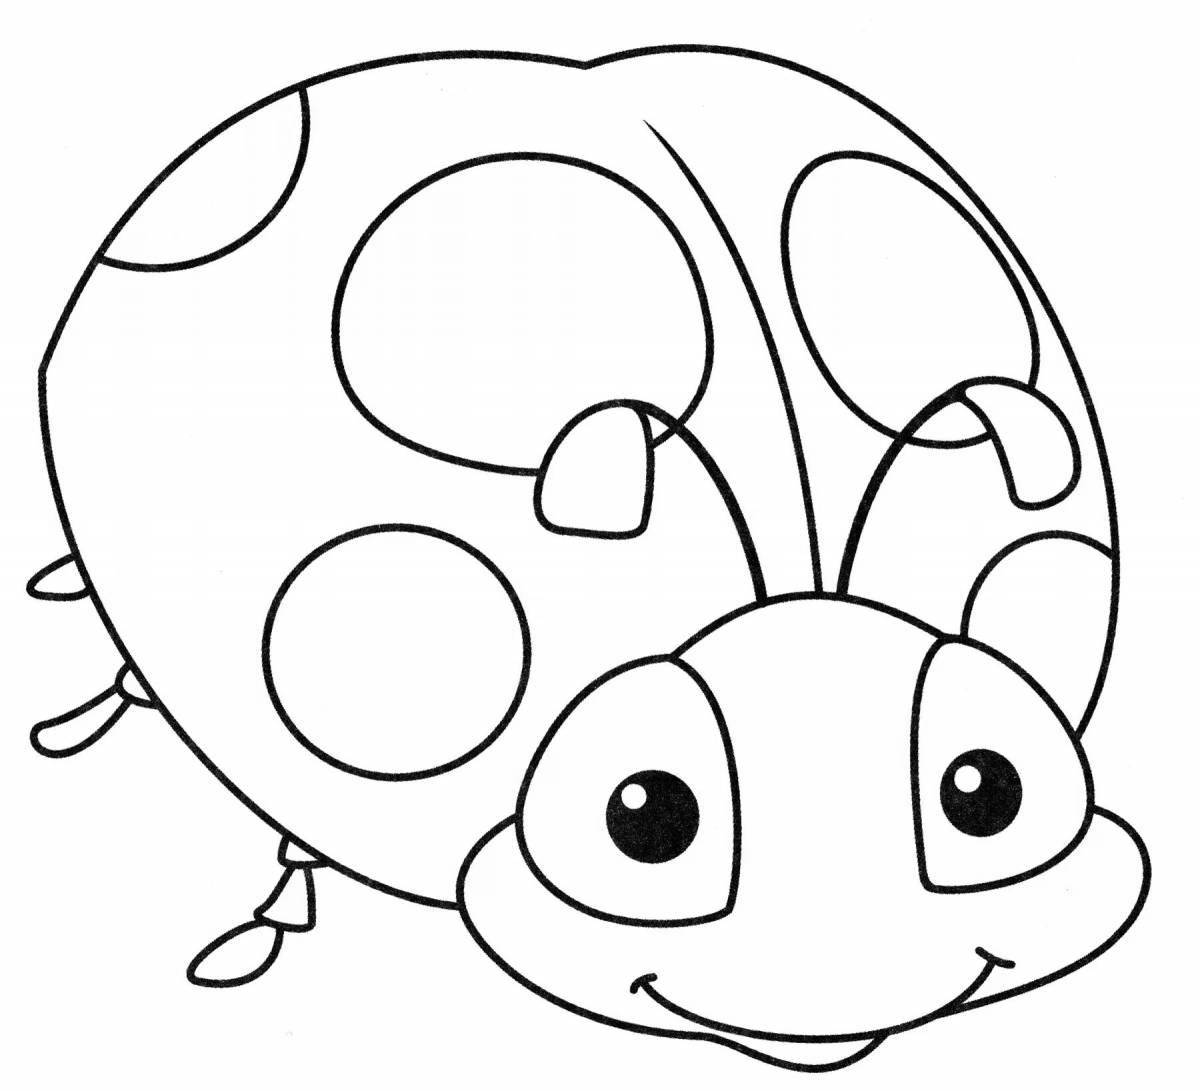 Cute ladybug coloring for kids